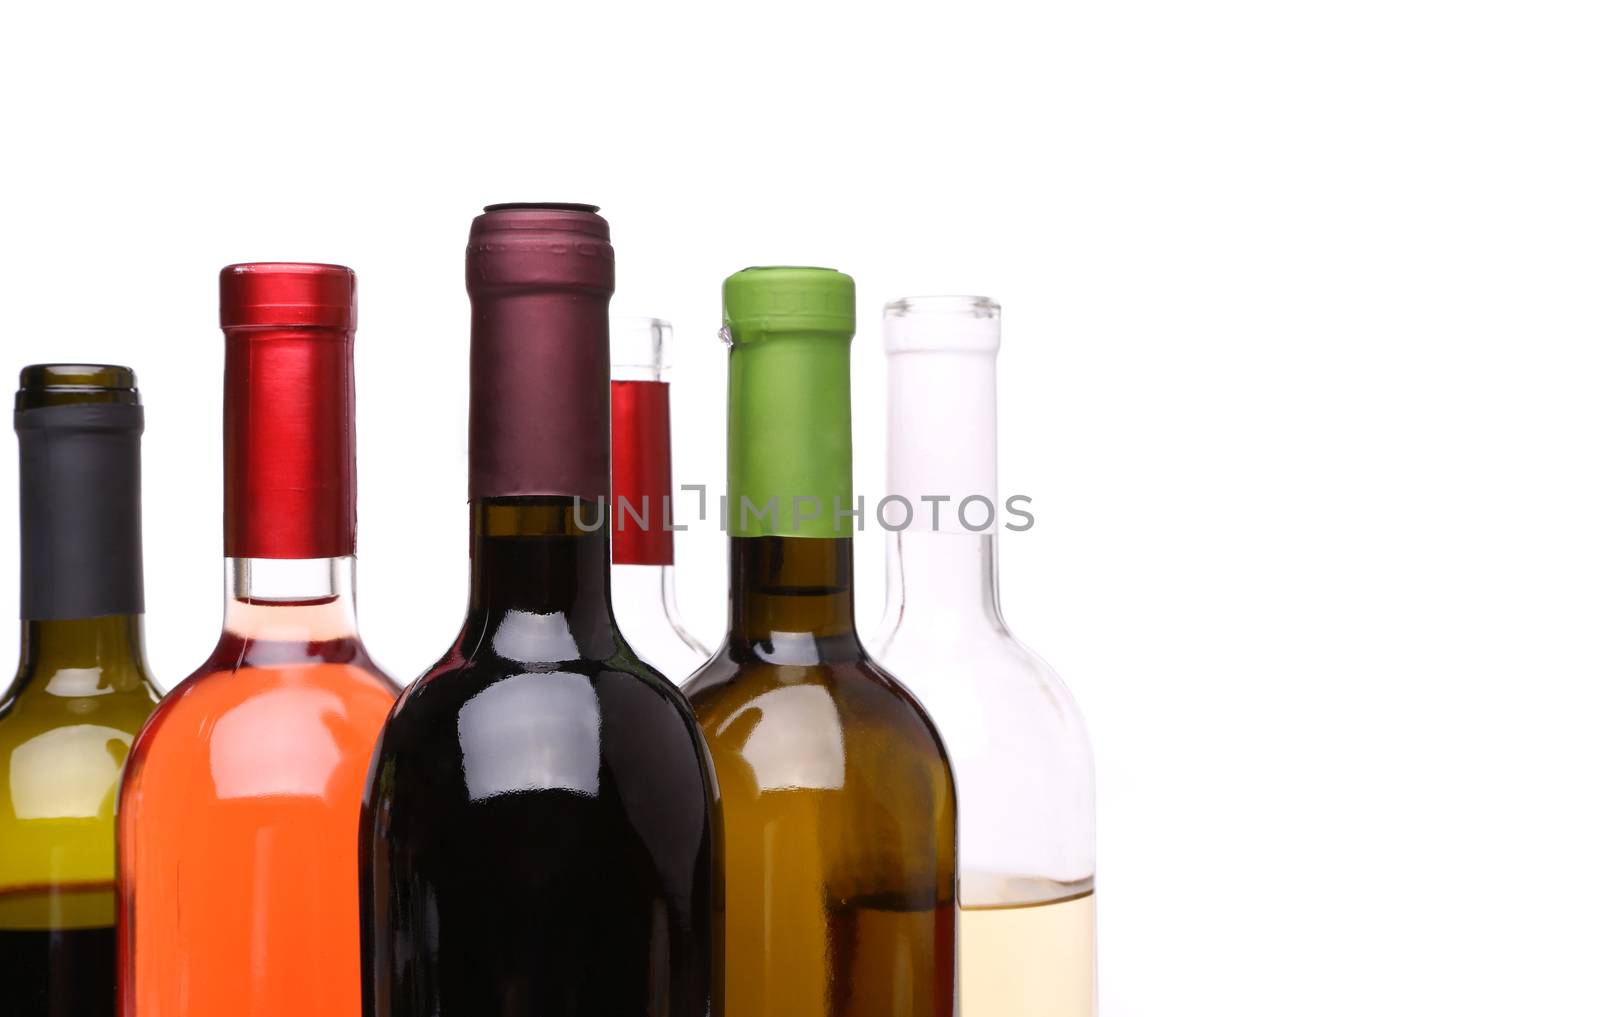 A set of many bottles of wine by indigolotos